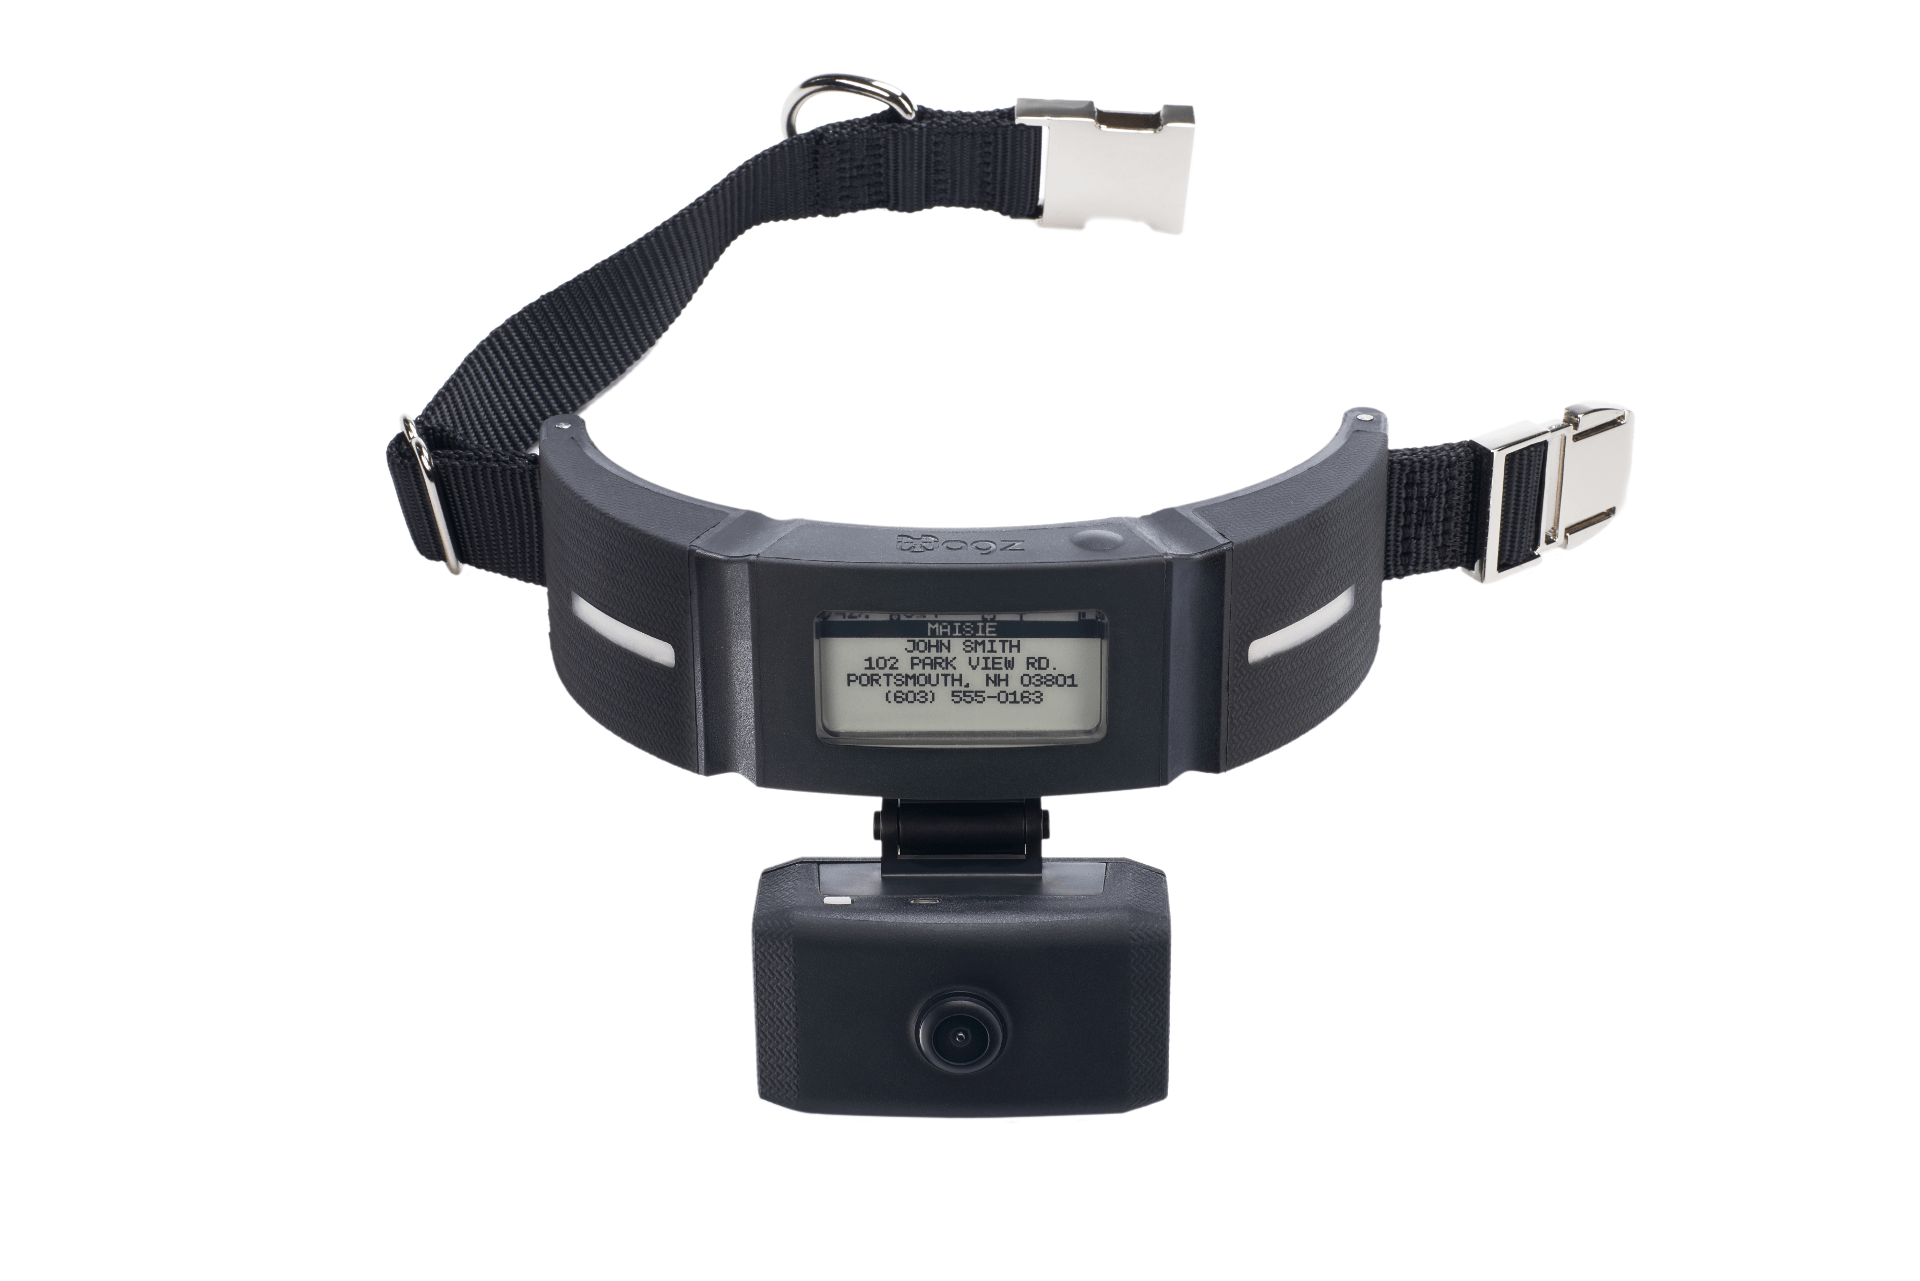 Wagz Smart Collar uses LTE Technology to Monitor Dogs.